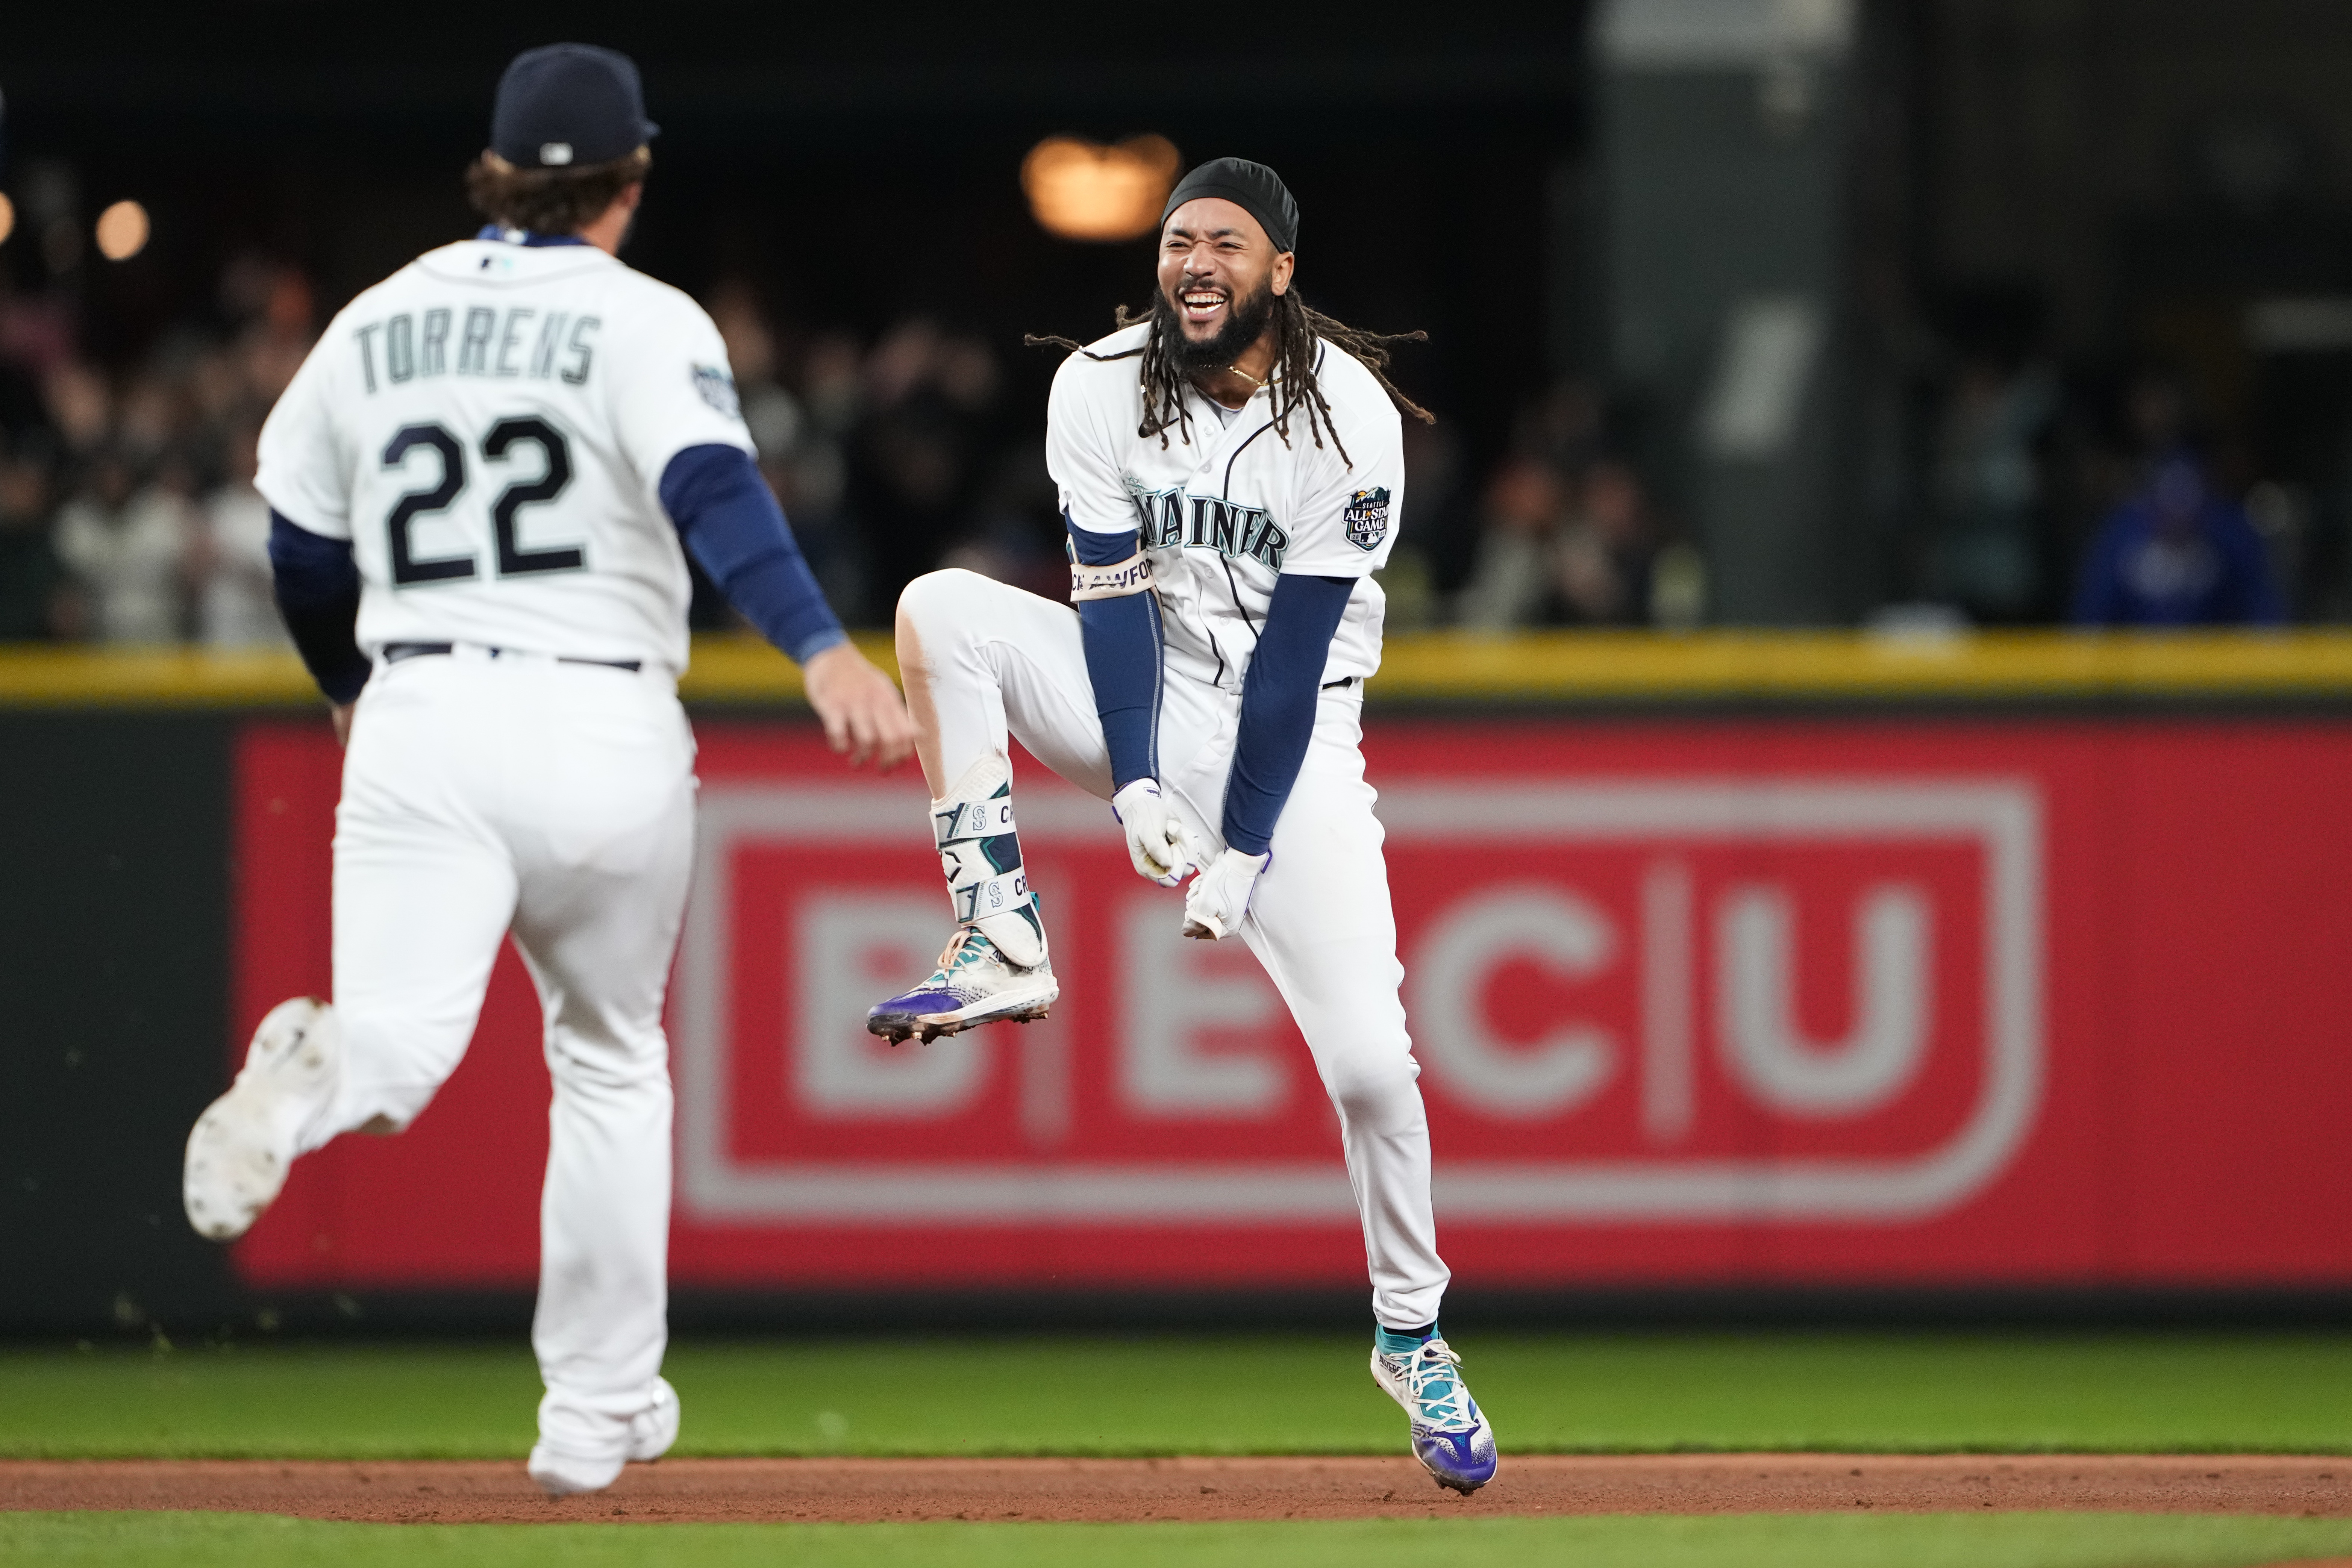 Analysis: What's coming up for Mariners in second half? Losing